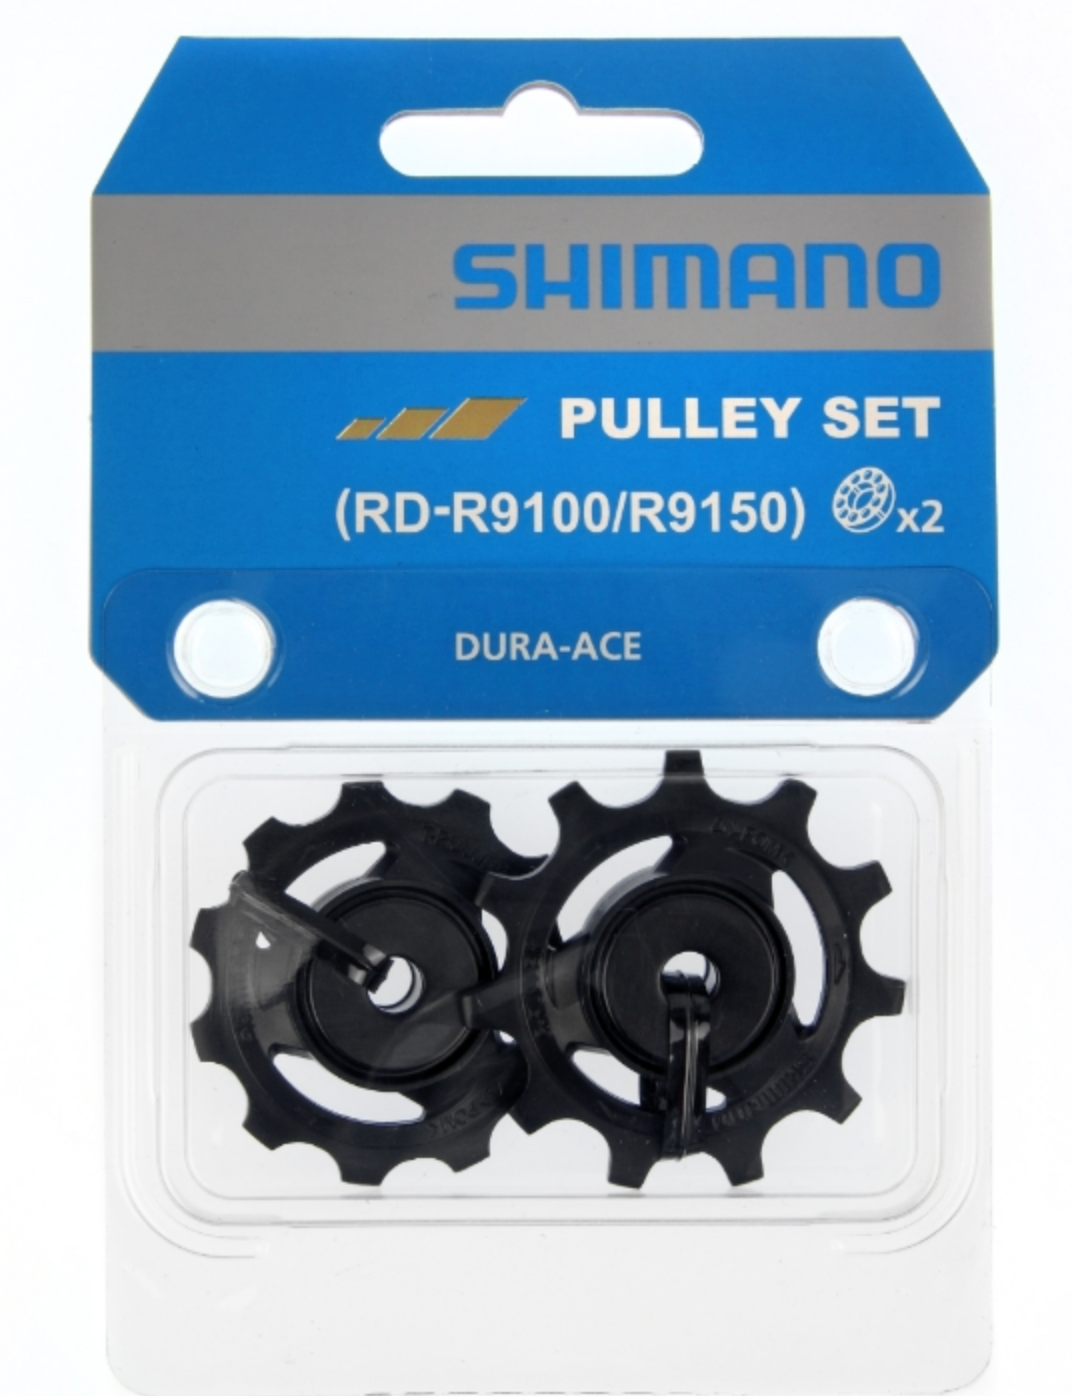 Pulley Set Dura-Ace RD-9100